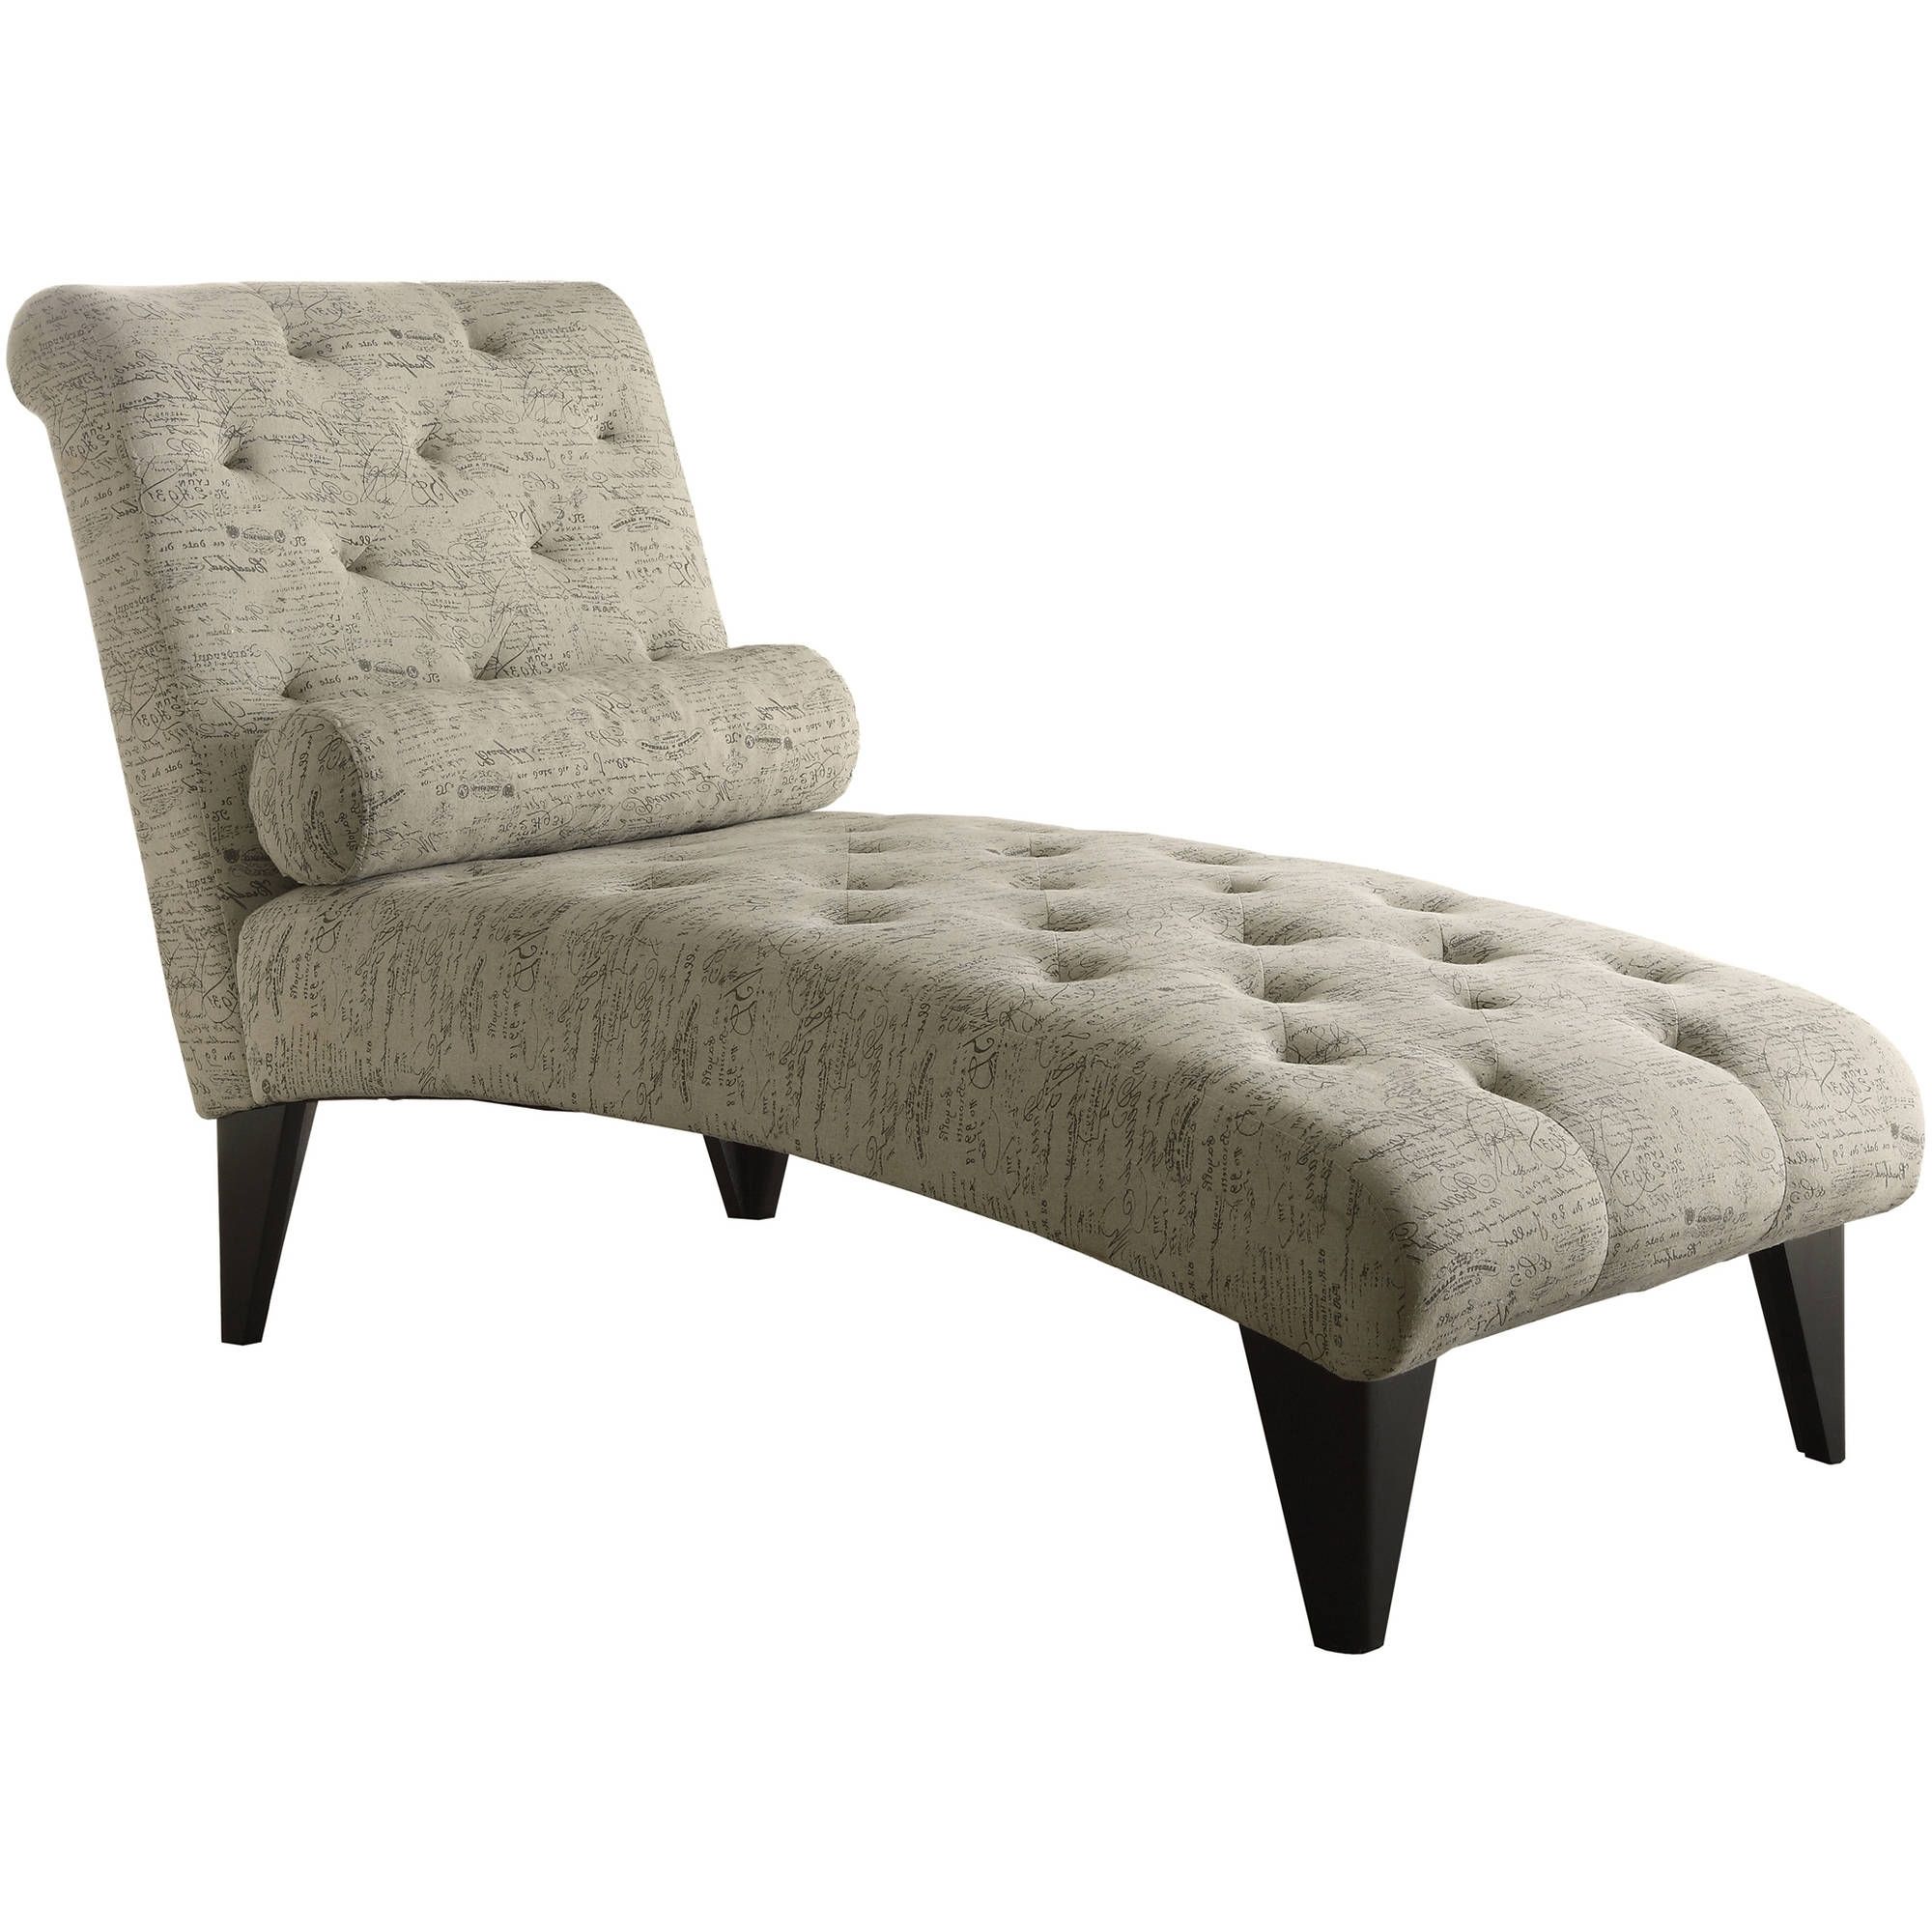 Tufted Chaise Lounge Chairs Intended For Widely Used Chaise Lounges – Walmart (Photo 1 of 15)